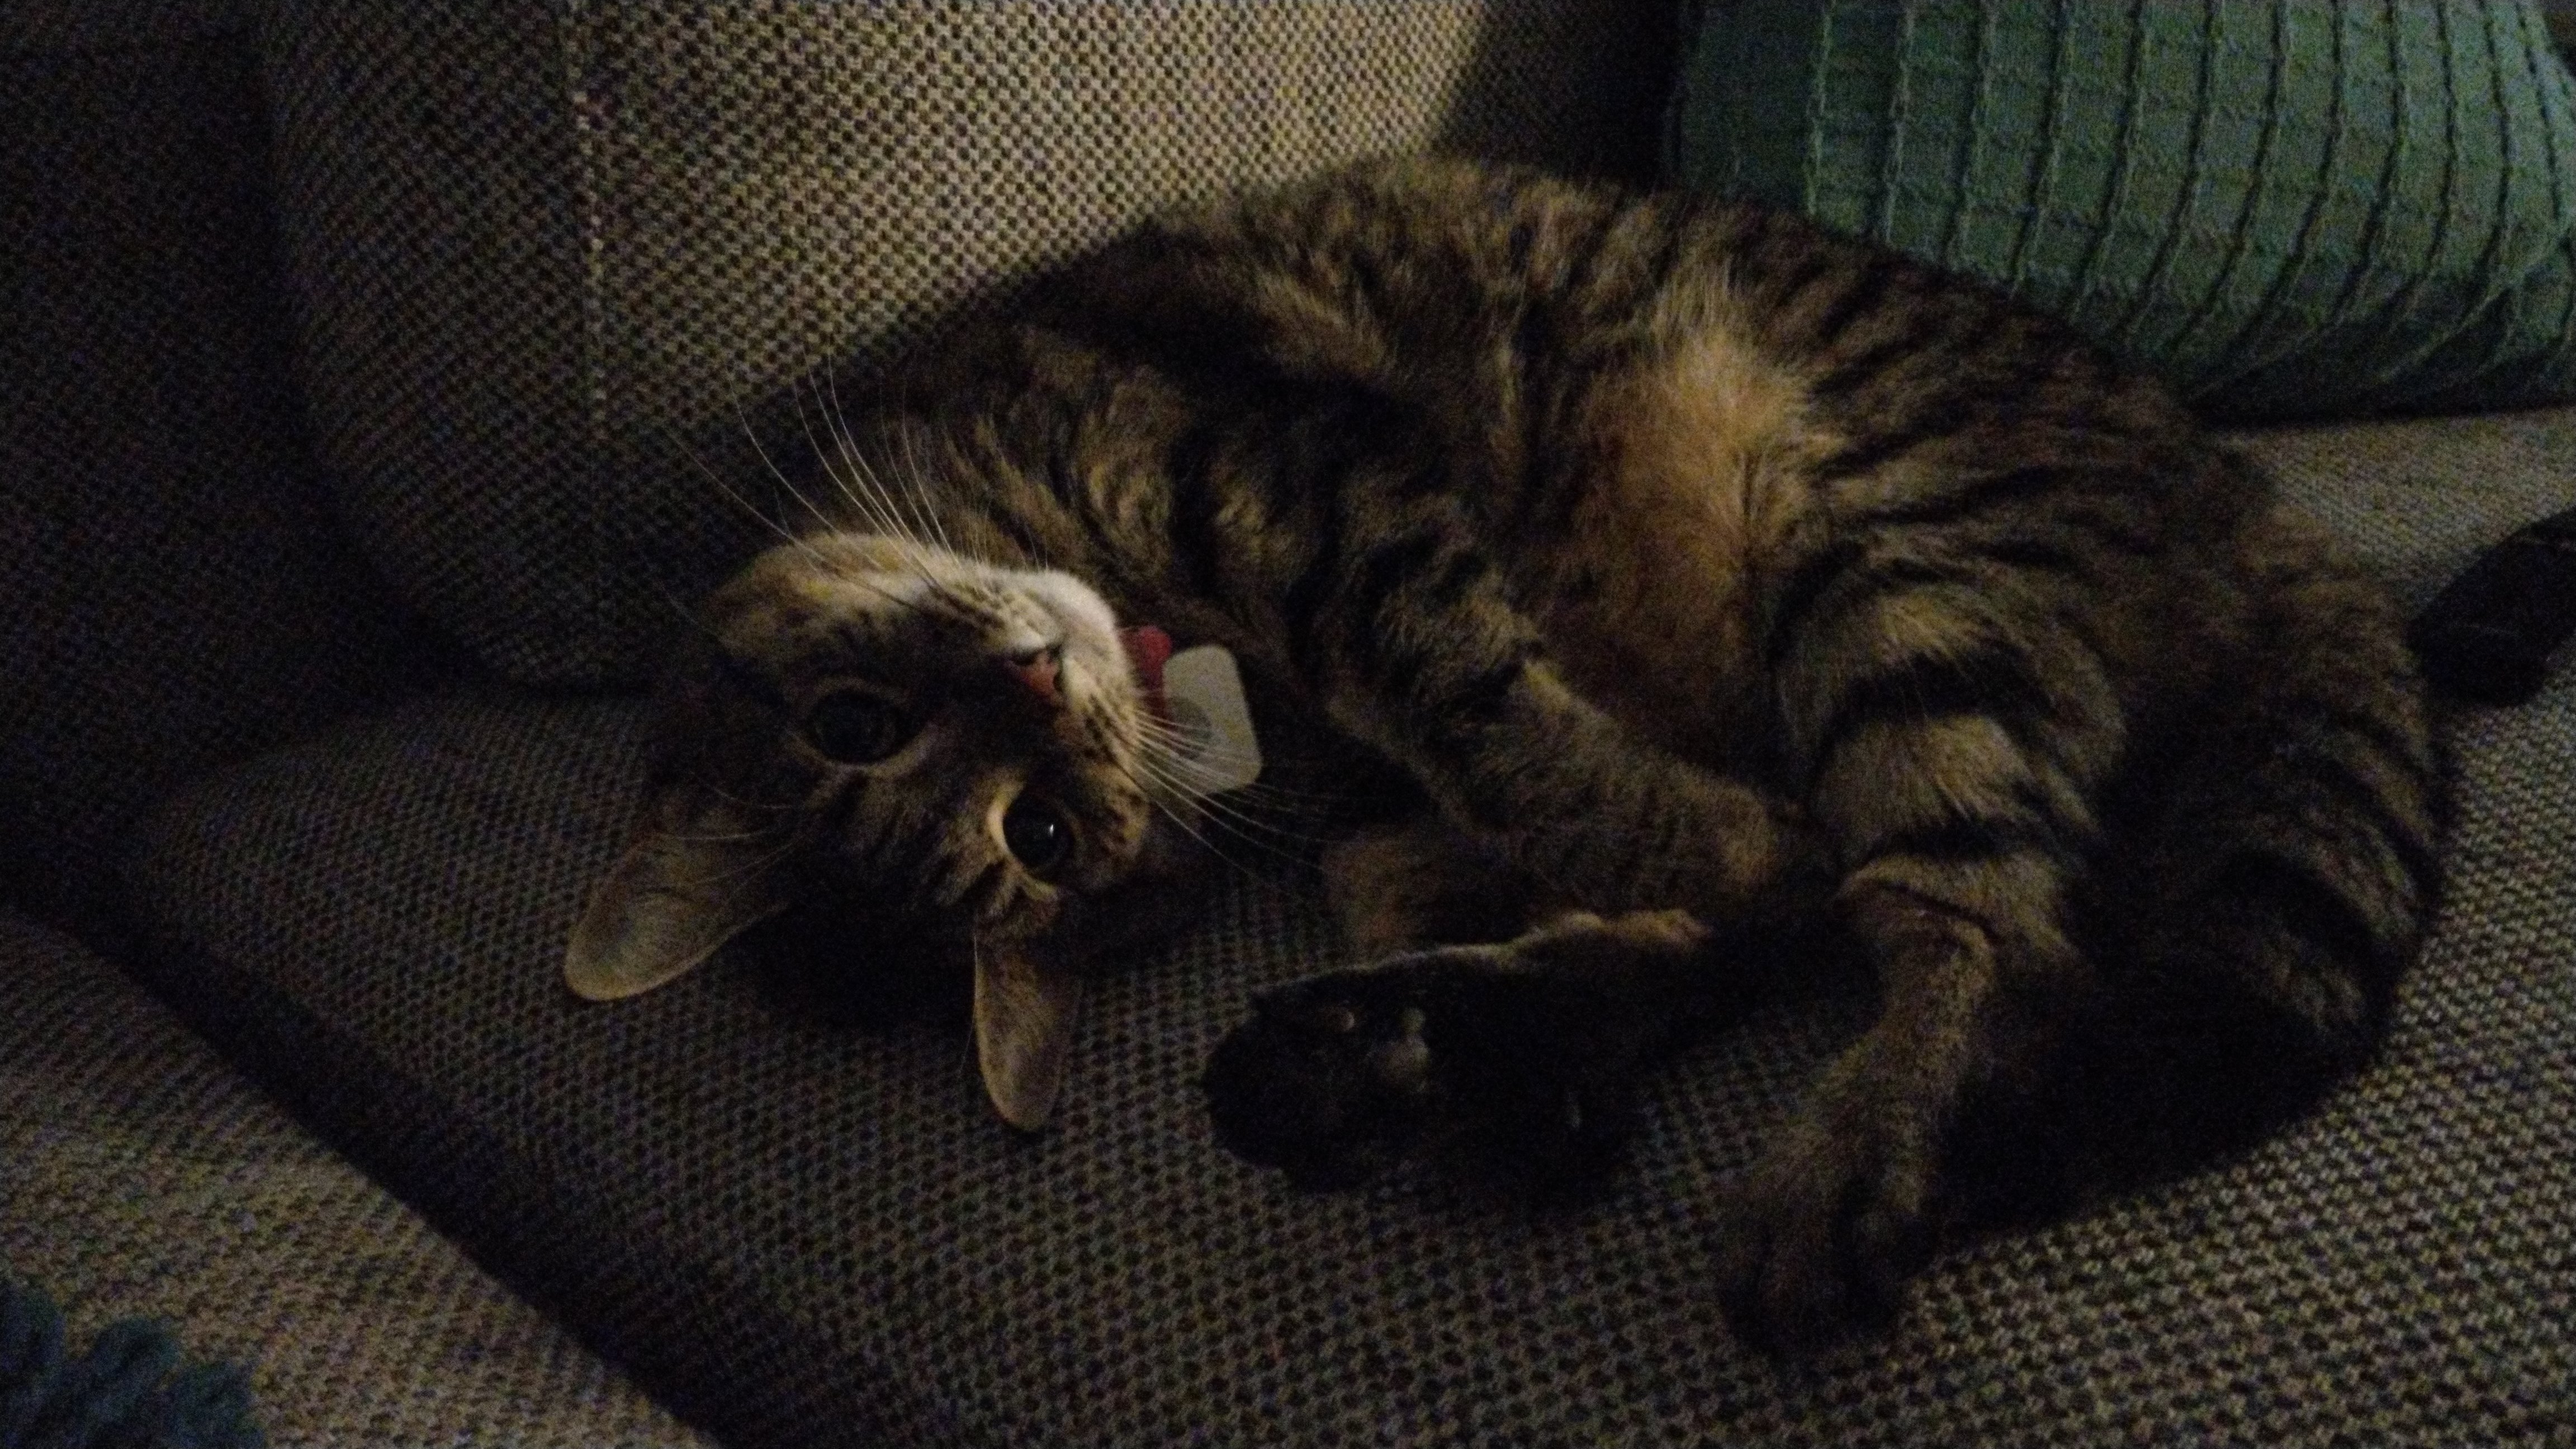 a striped tabby cat with dark paws and large eyes flopped on a grey couch with its head upside down and its belly and face looking at you